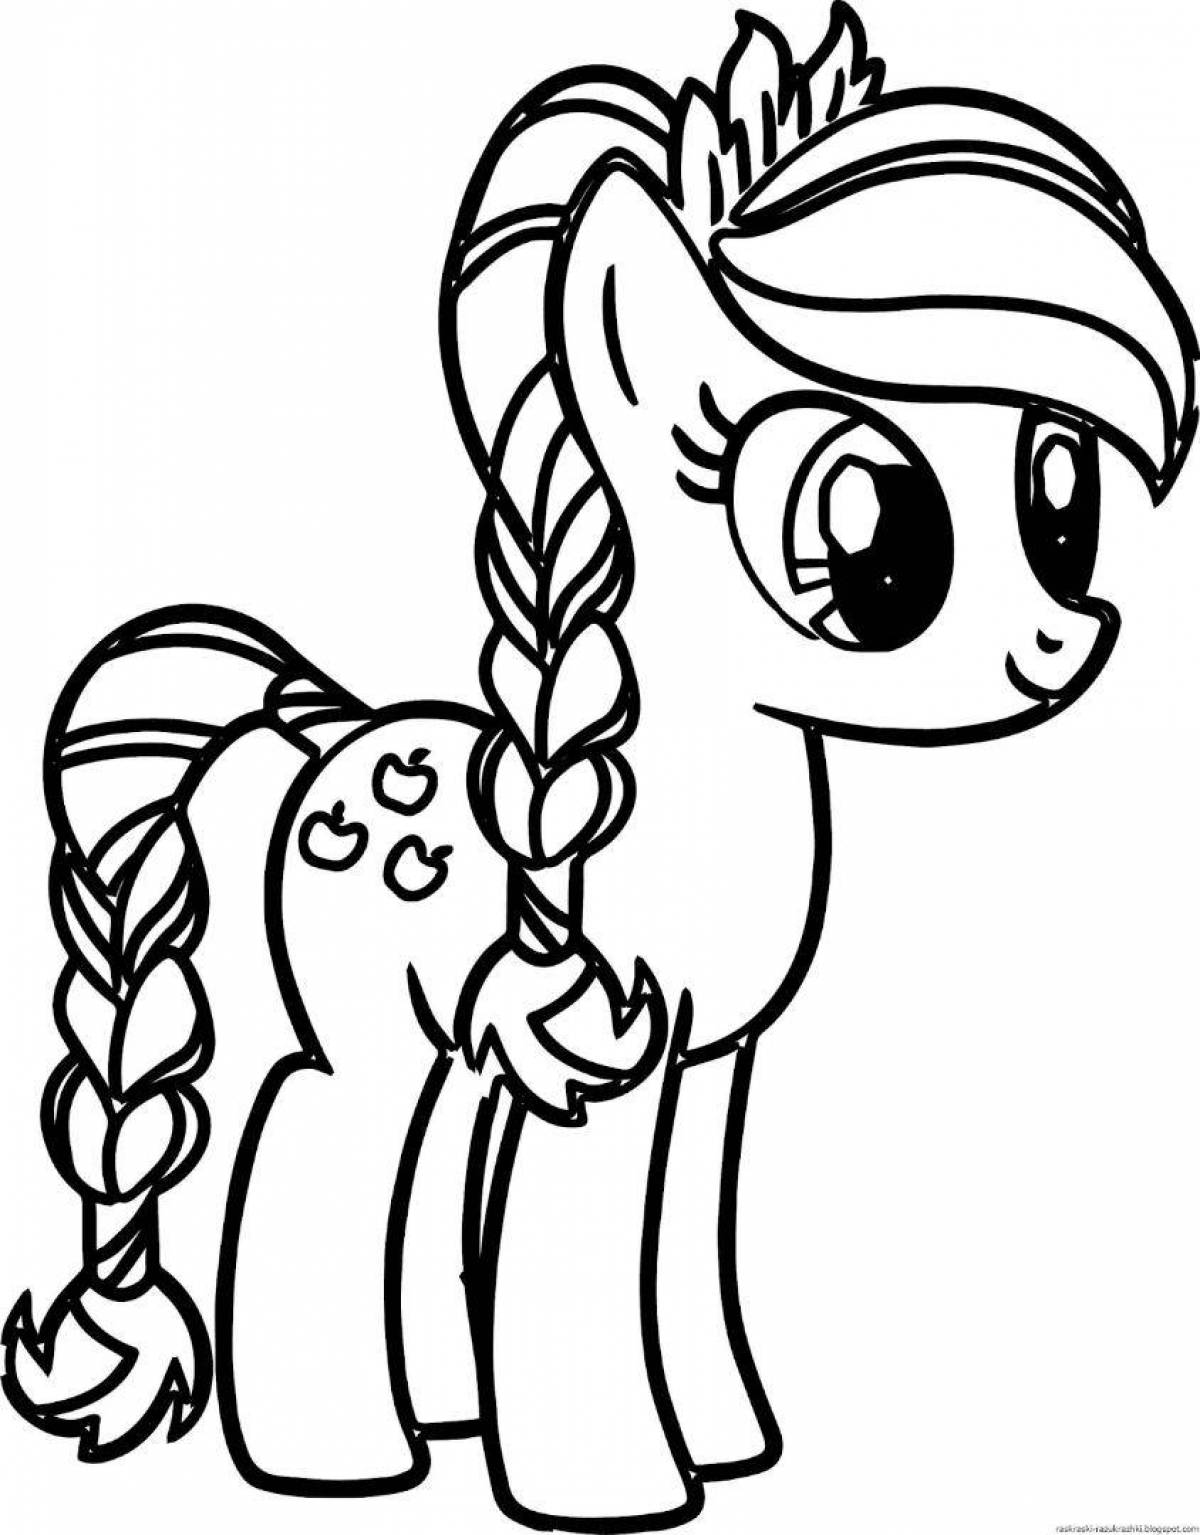 Animated pony coloring page for 4-5 year olds